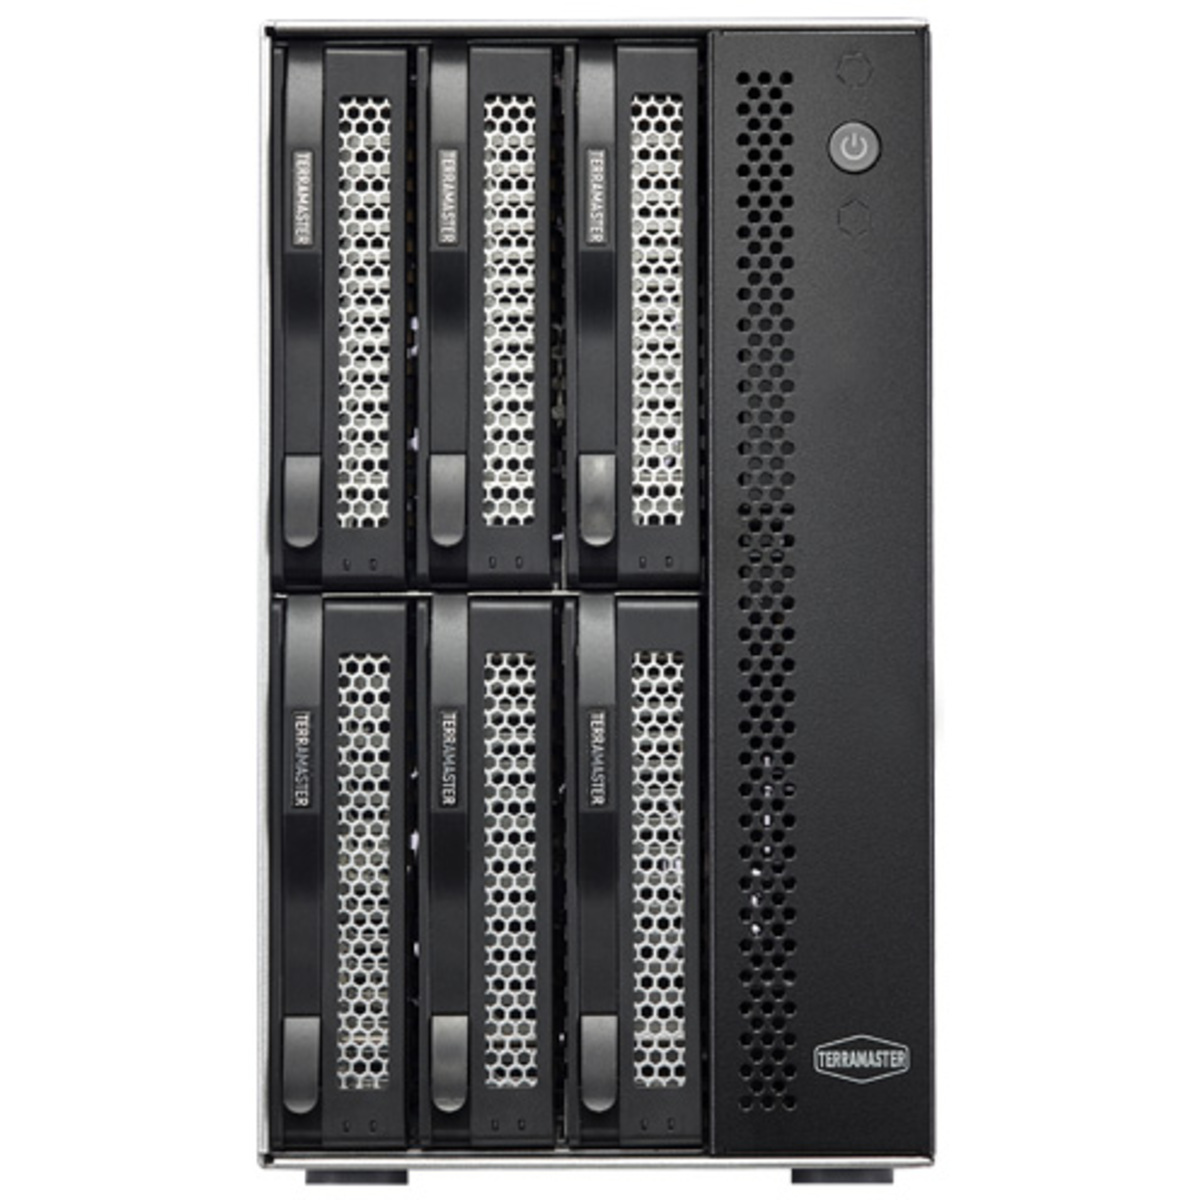 TerraMaster D6-320 18tb 6-Bay Desktop Multimedia / Power User / Business DAS - Direct Attached Storage Device 3x6tb Seagate IronWolf ST6000VN006 3.5 5400rpm SATA 6Gb/s HDD NAS Class Drives Installed - Burn-In Tested D6-320